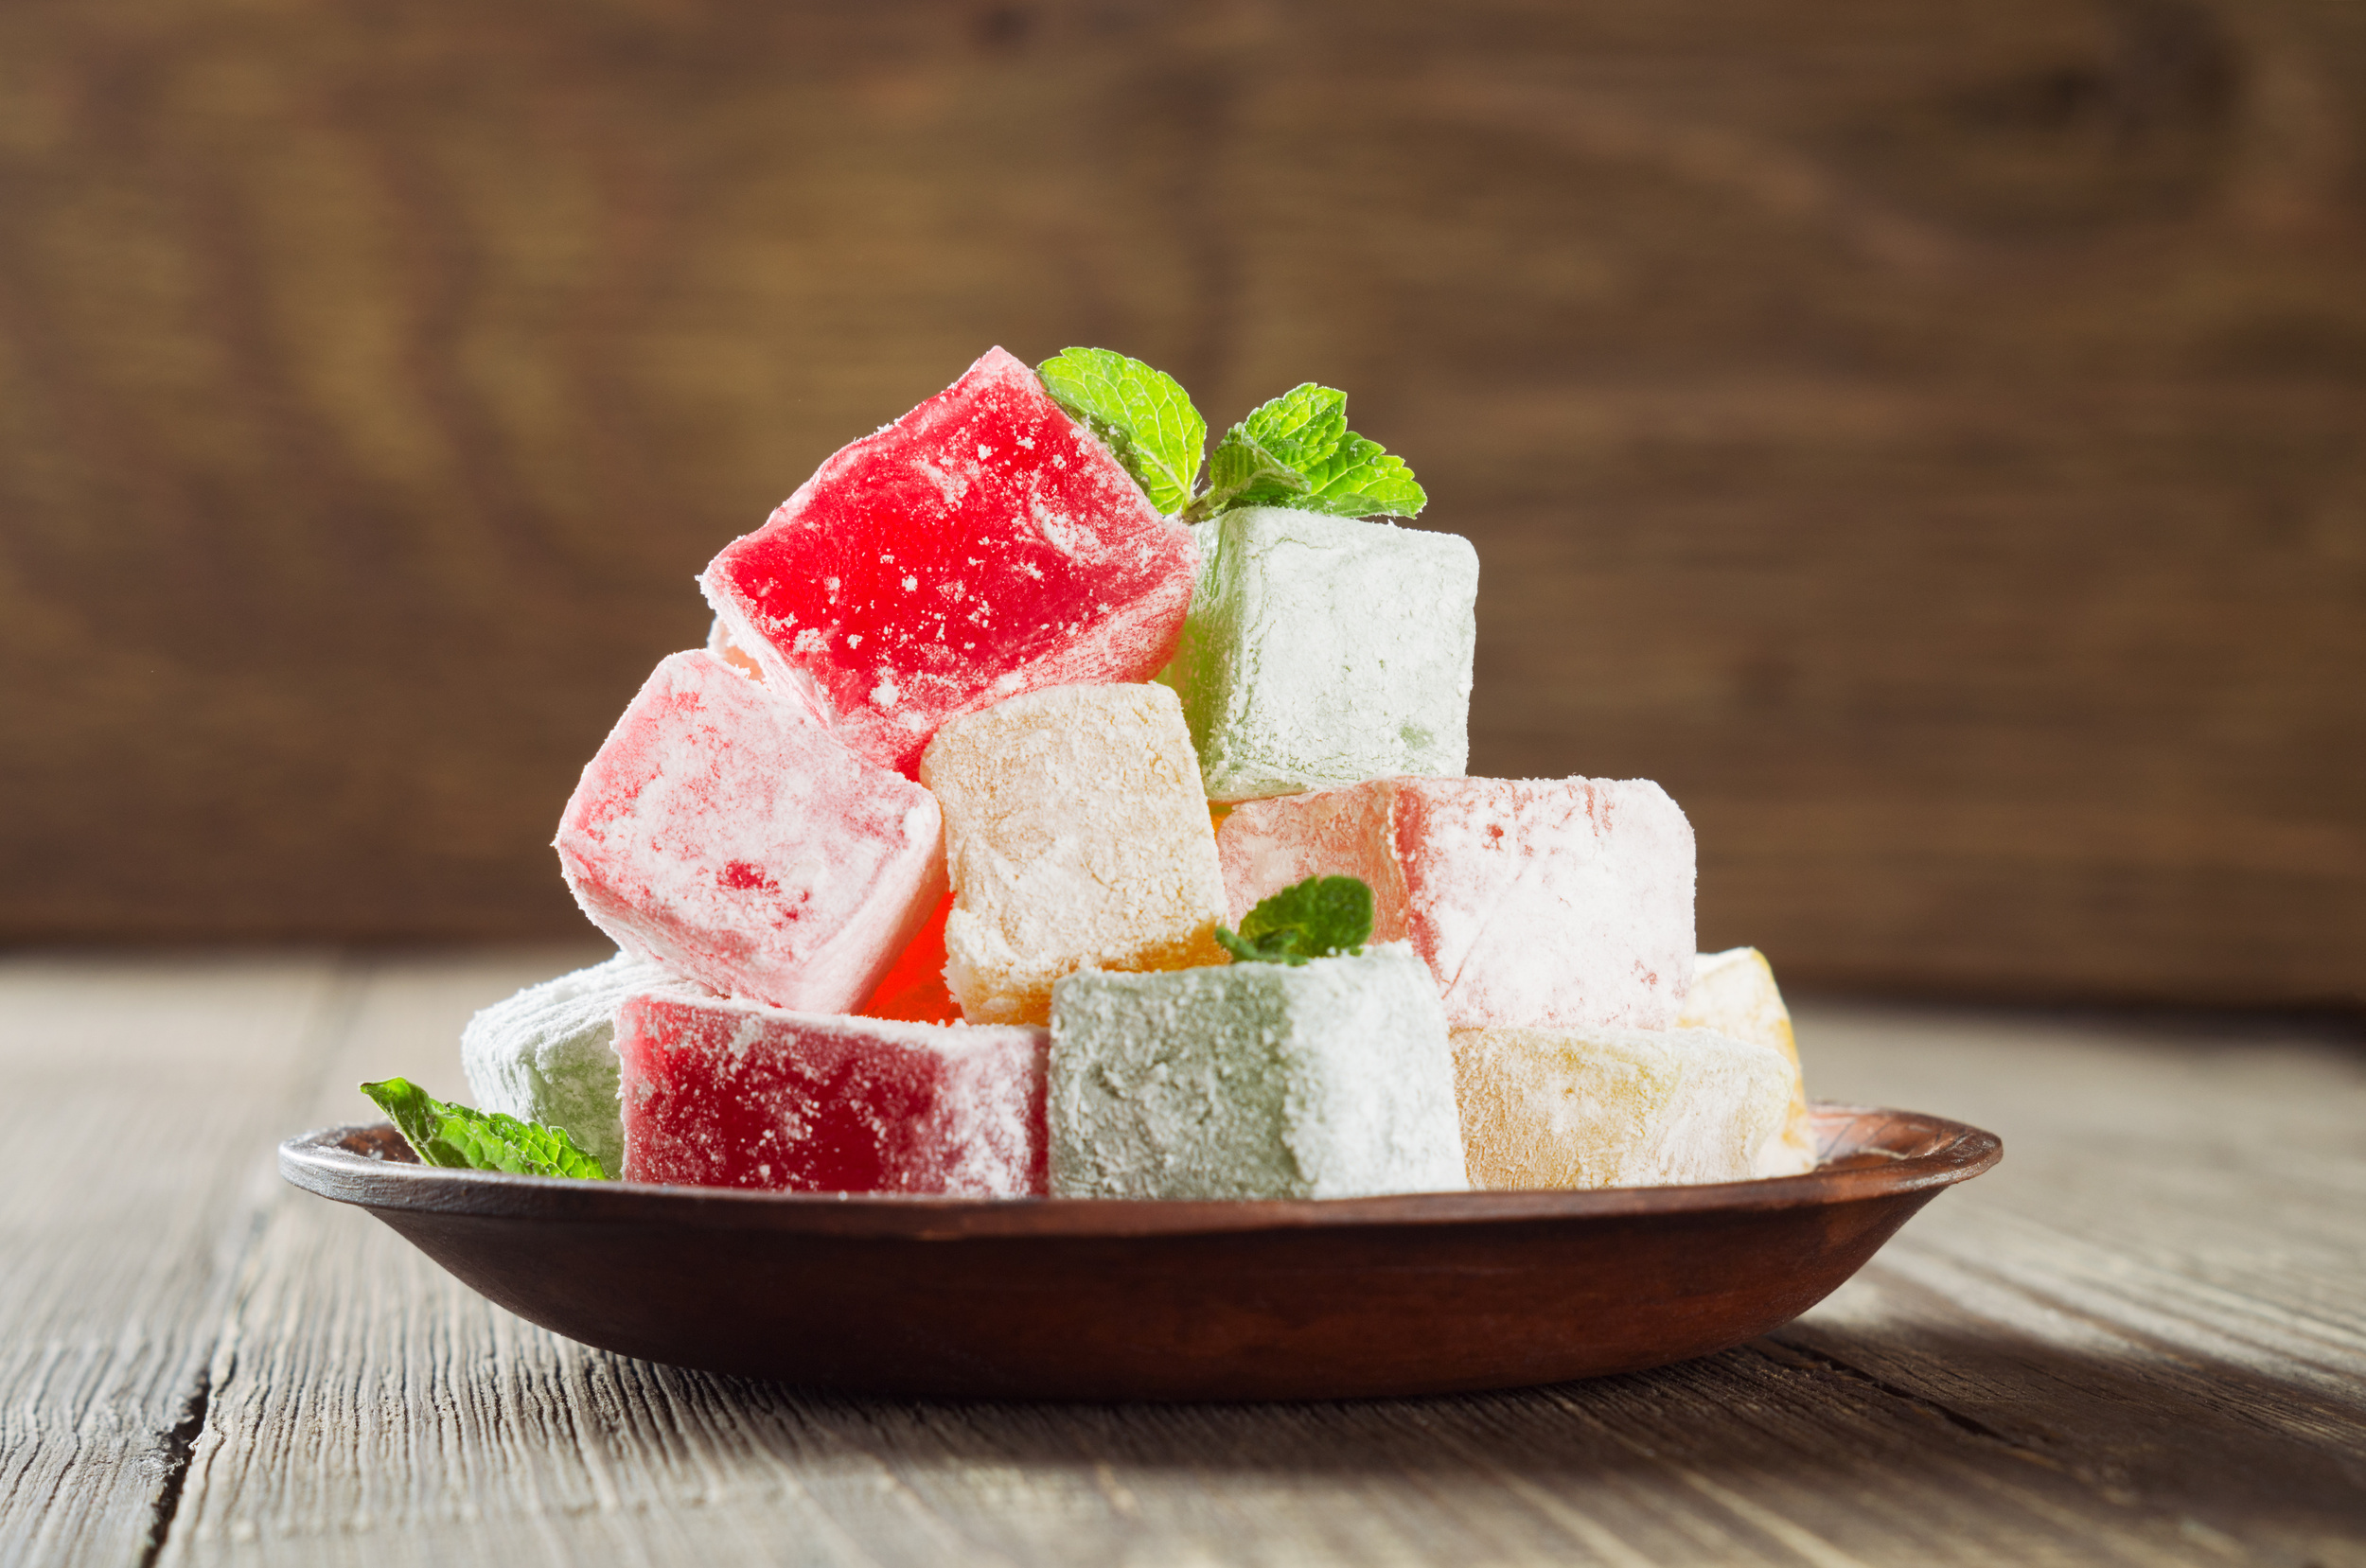 <p><em>Lokum</em> is probably the most popular dessert to come out of Turkey, and if that name doesn’t ring a bell, we should mention that it’s also known as “Turkish delight.” These soft, slightly chewy jelly candies come in a seemingly endless number of varieties that include fruit, nuts, and/or various spices. <a href="https://www.aspicyperspective.com/the-tastiest-turkish-delight-recipe-lokum/"><span>A Spicy Perspective can show you</span></a> how to make a version with rosewater, raspberry and orange extracts, and chopped pistachios. </p><p><a href='https://www.msn.com/en-us/community/channel/vid-cj9pqbr0vn9in2b6ddcd8sfgpfq6x6utp44fssrv6mc2gtybw0us'>Follow us on MSN to see more of our exclusive lifestyle content.</a></p>